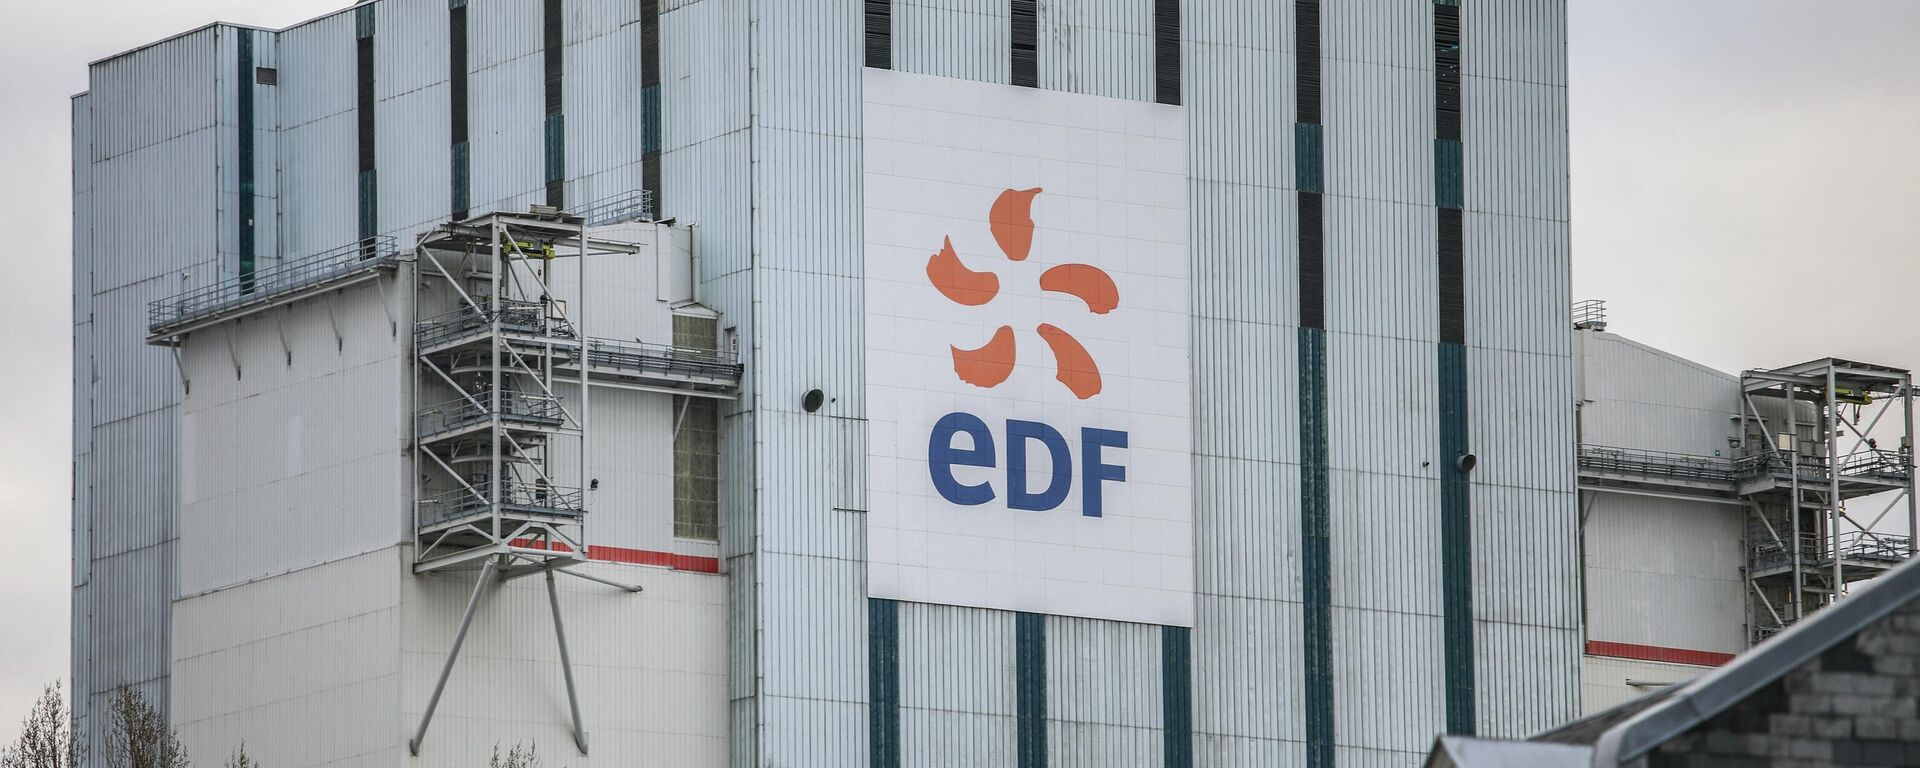 (FILES) In this file photo taken on January 10, 2020 a coal power-plant operated by French energy giant EDF (Electricite de France) is pictured in Le Havre, northwestern France.  - Sputnik International, 1920, 27.08.2022